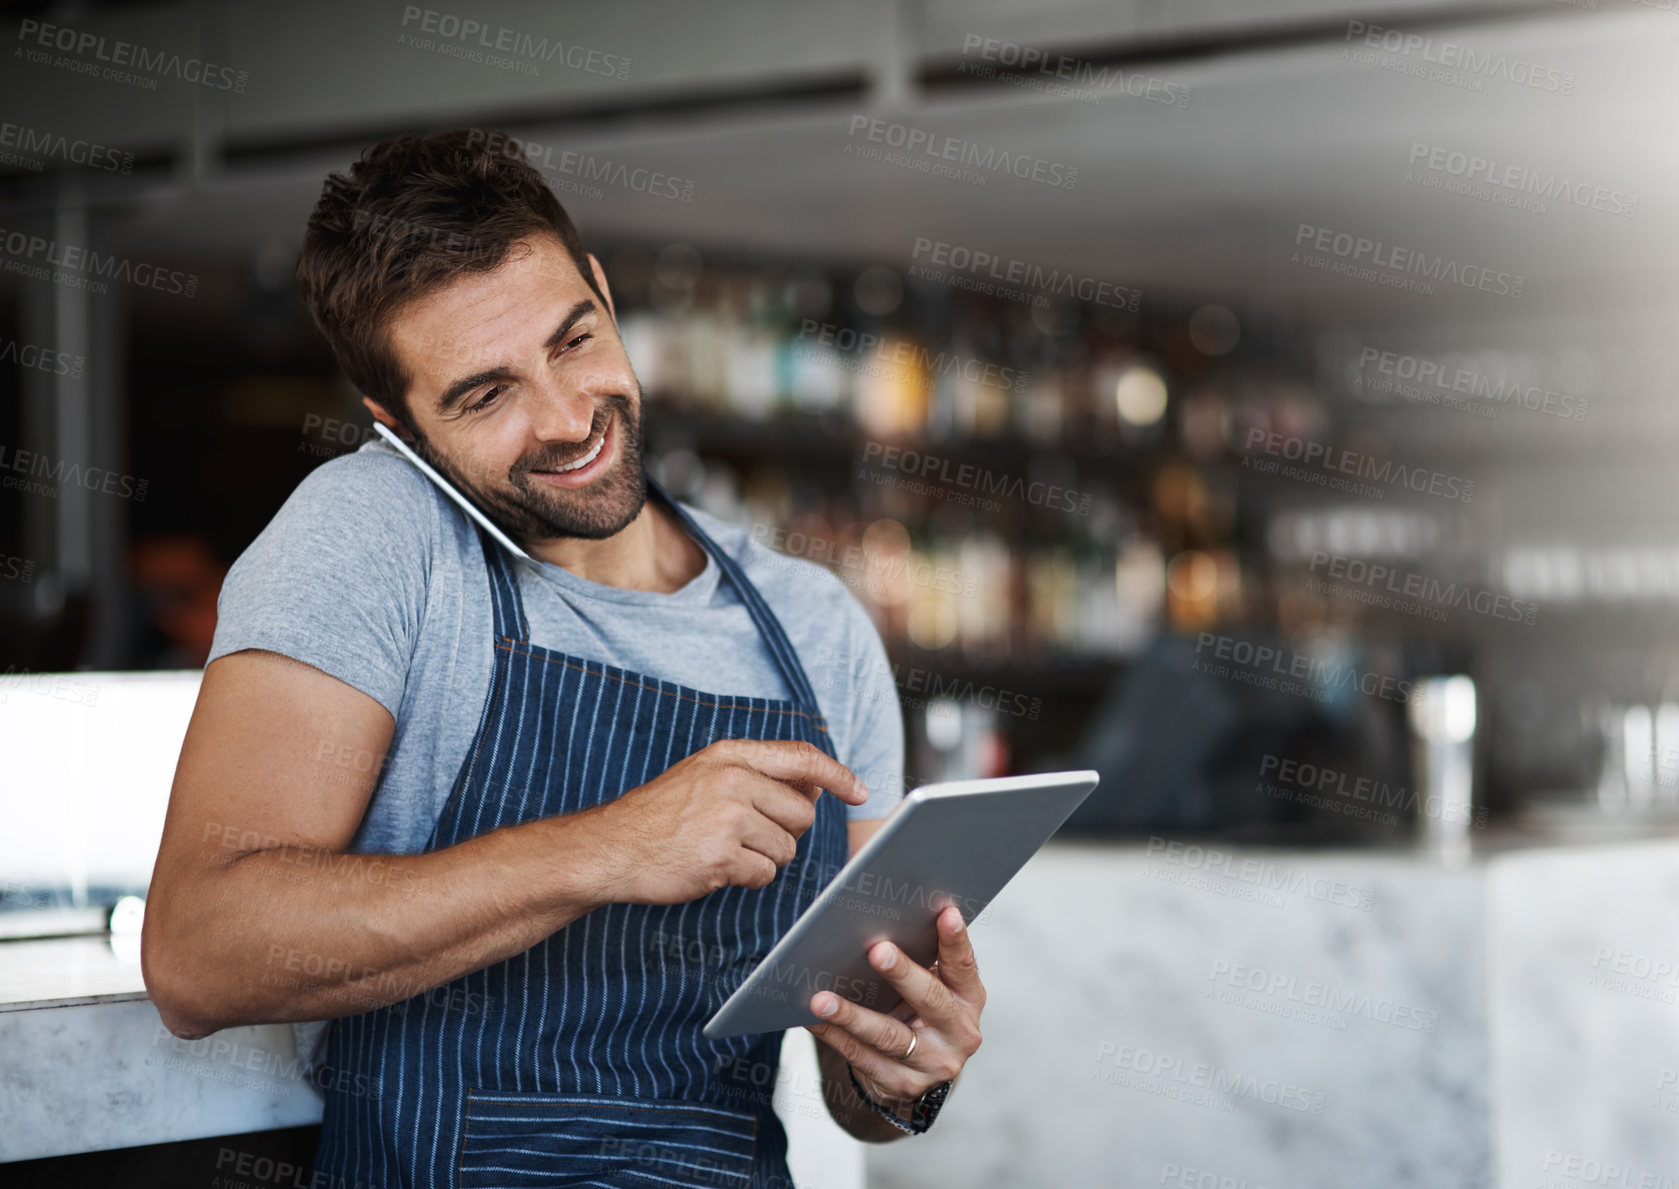 Buy stock photo Shot of a young man using a digital tablet and mobile phone while working at a coffee shop